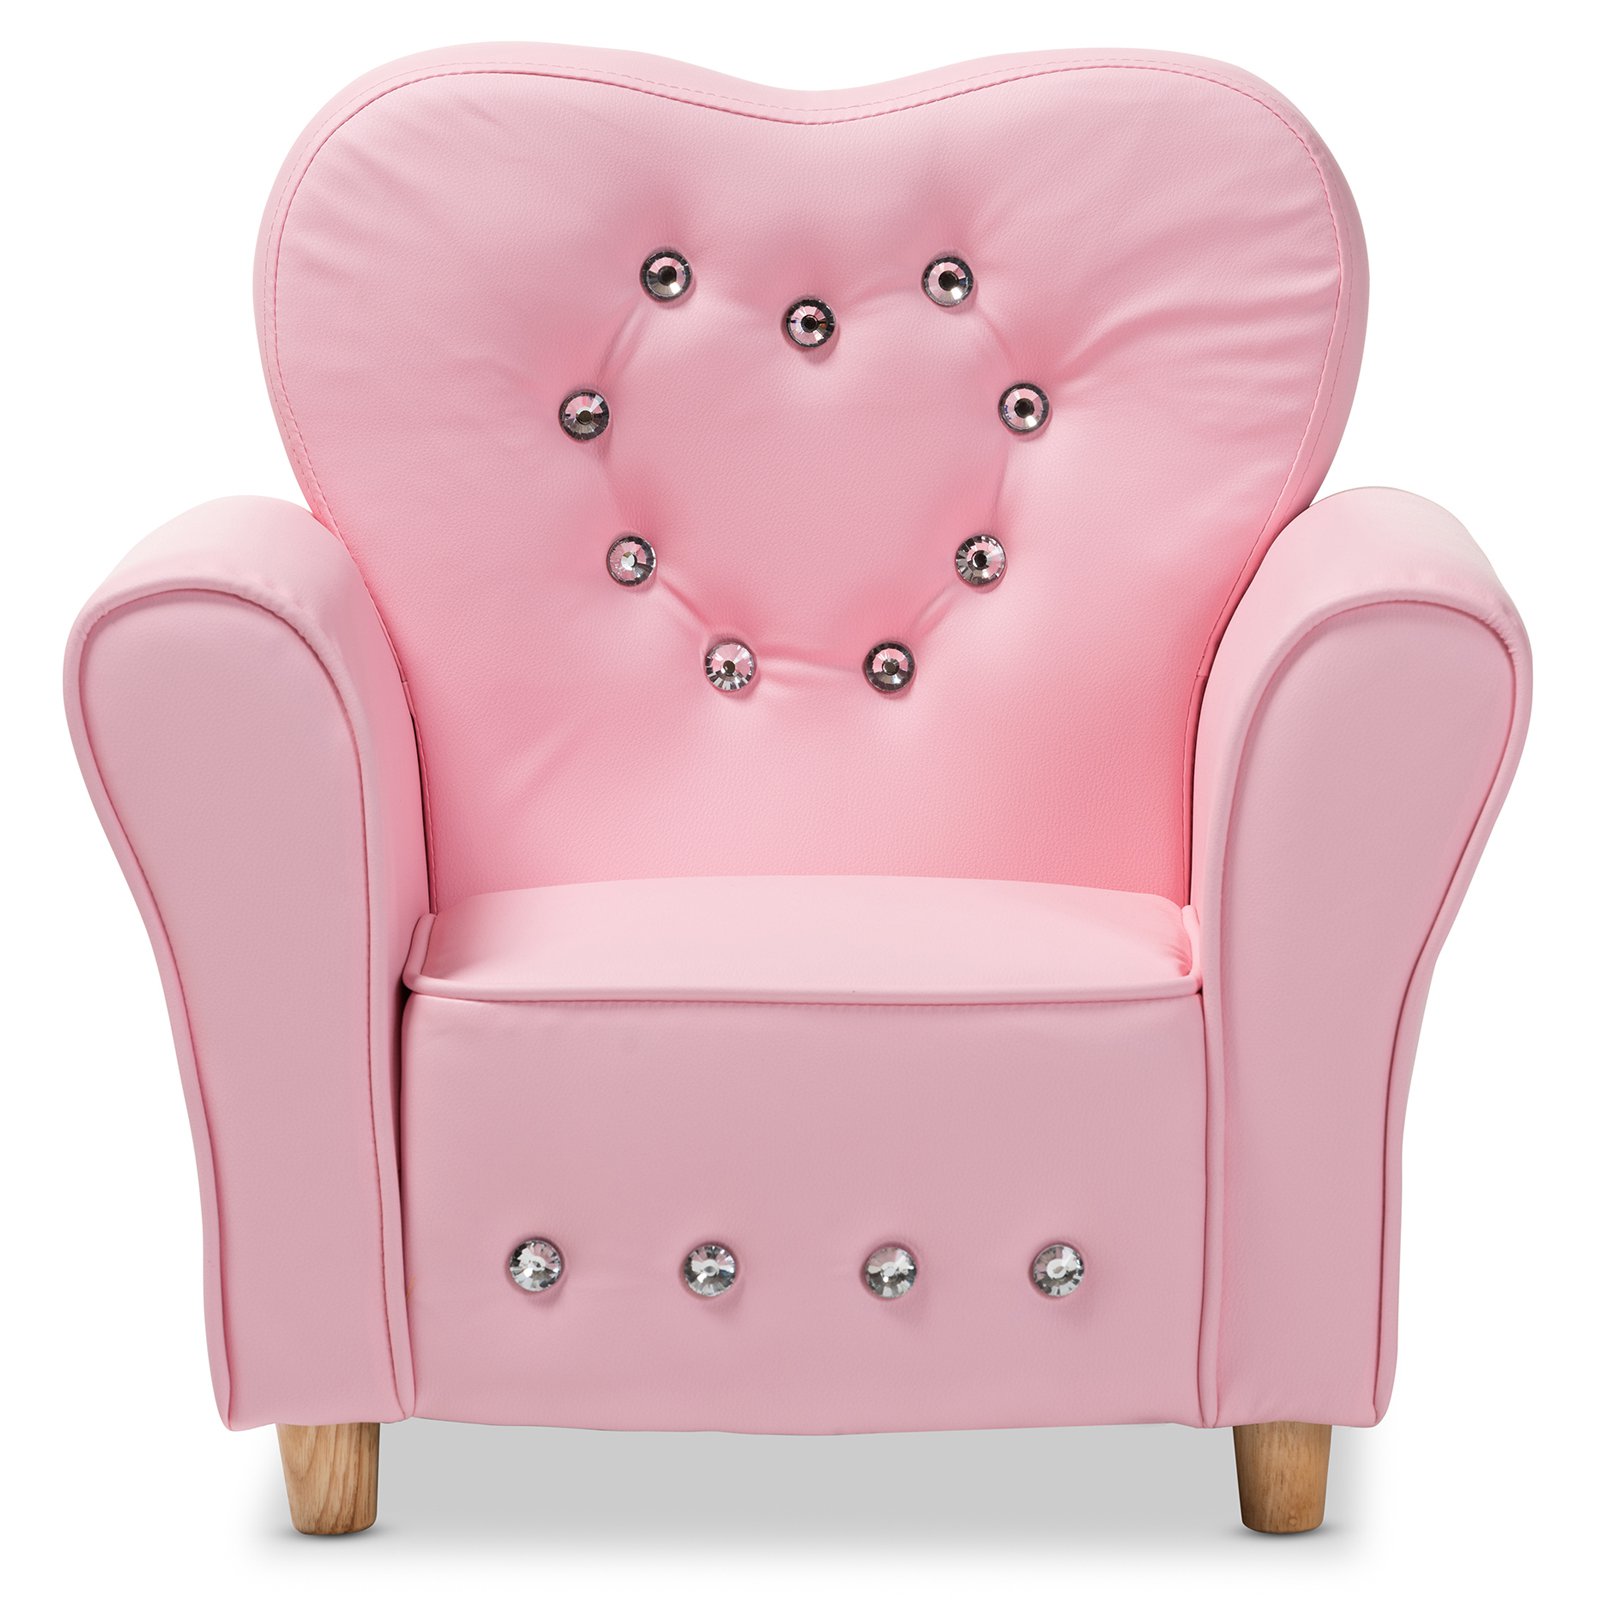 Baxton Studio Mabel Modern and Contemporary Pink Faux Leather Kids Armchair - image 3 of 8